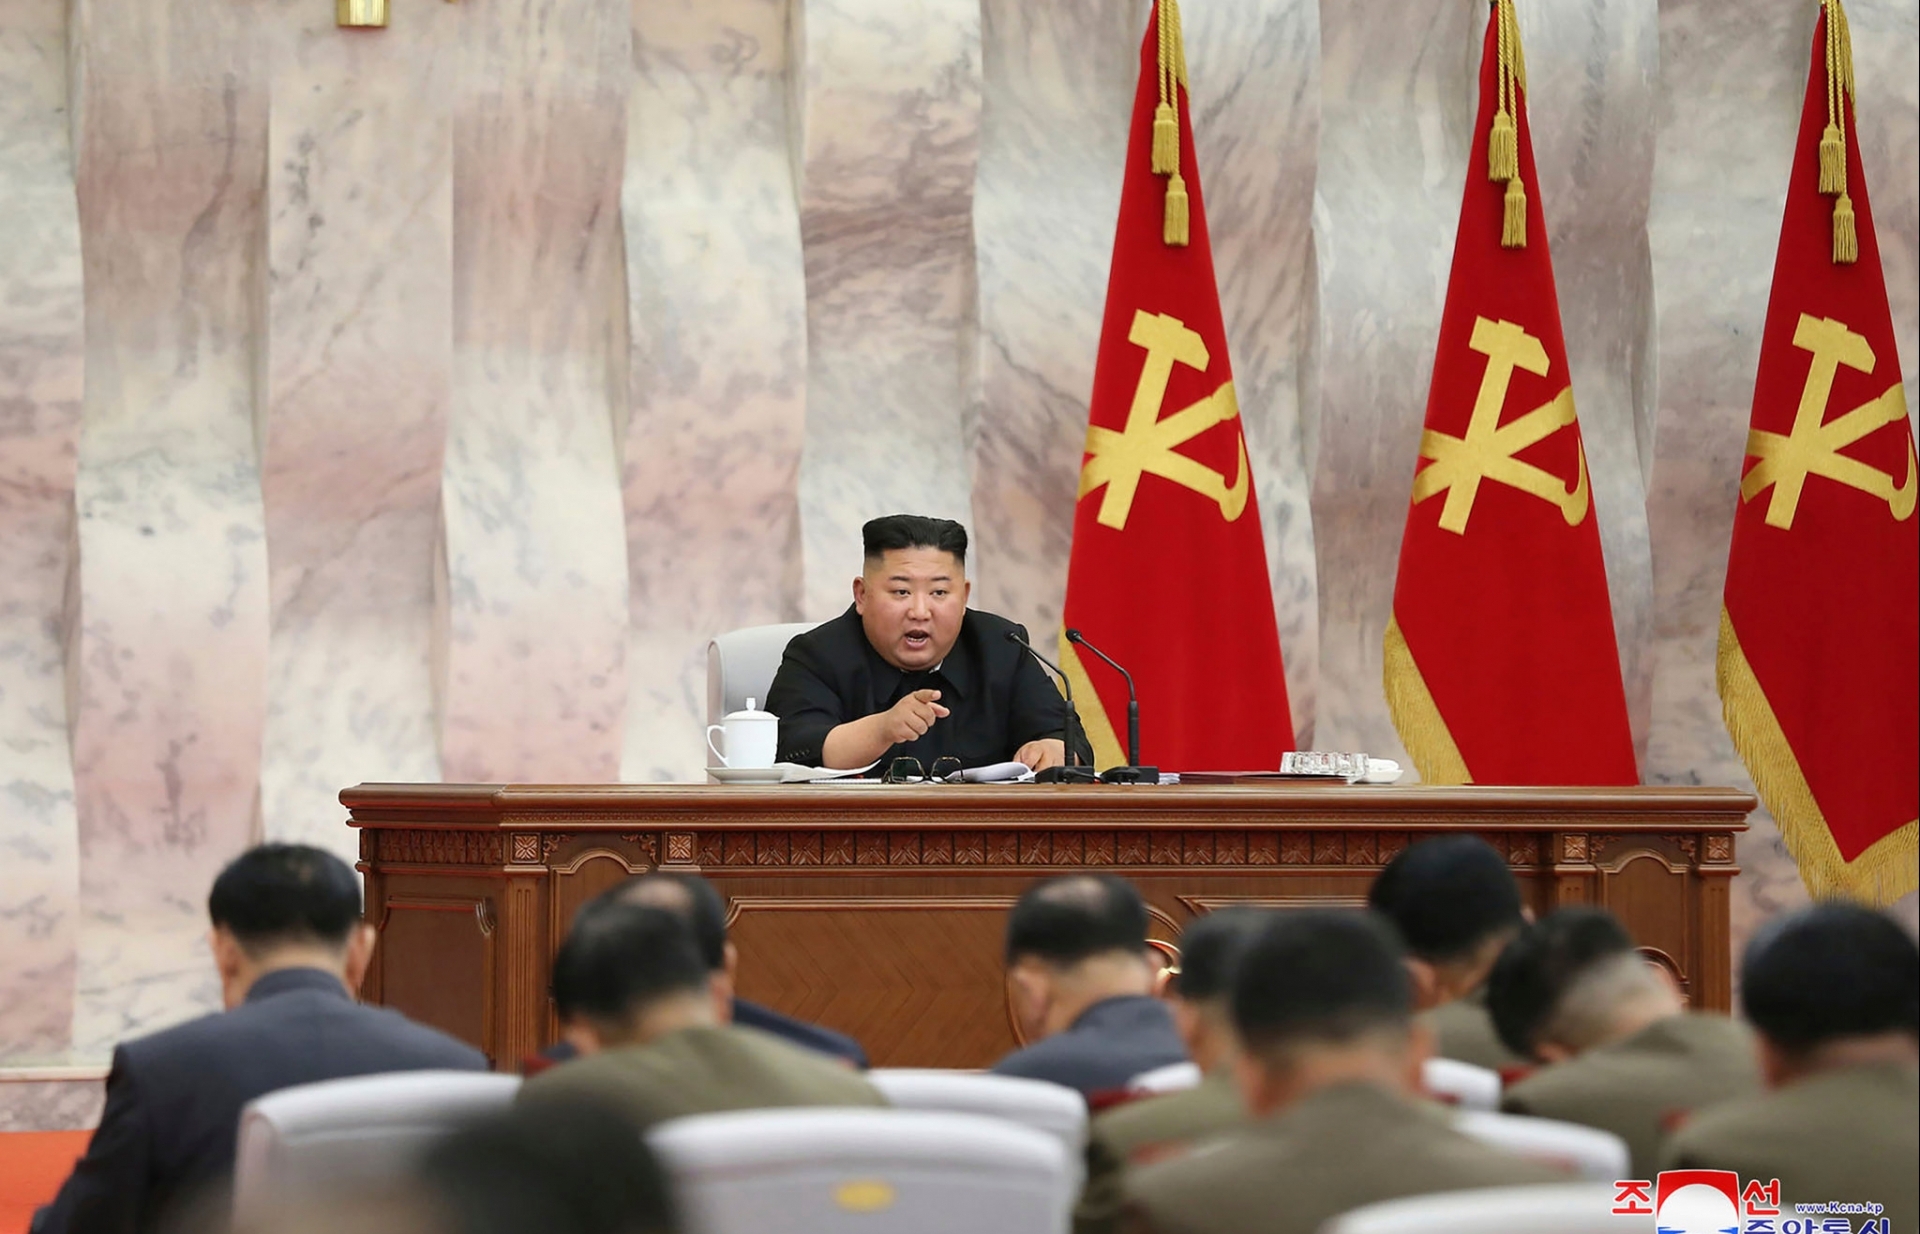 World news today: Kim Jong-un moves to Increase North Korea’s Nuclear Strength